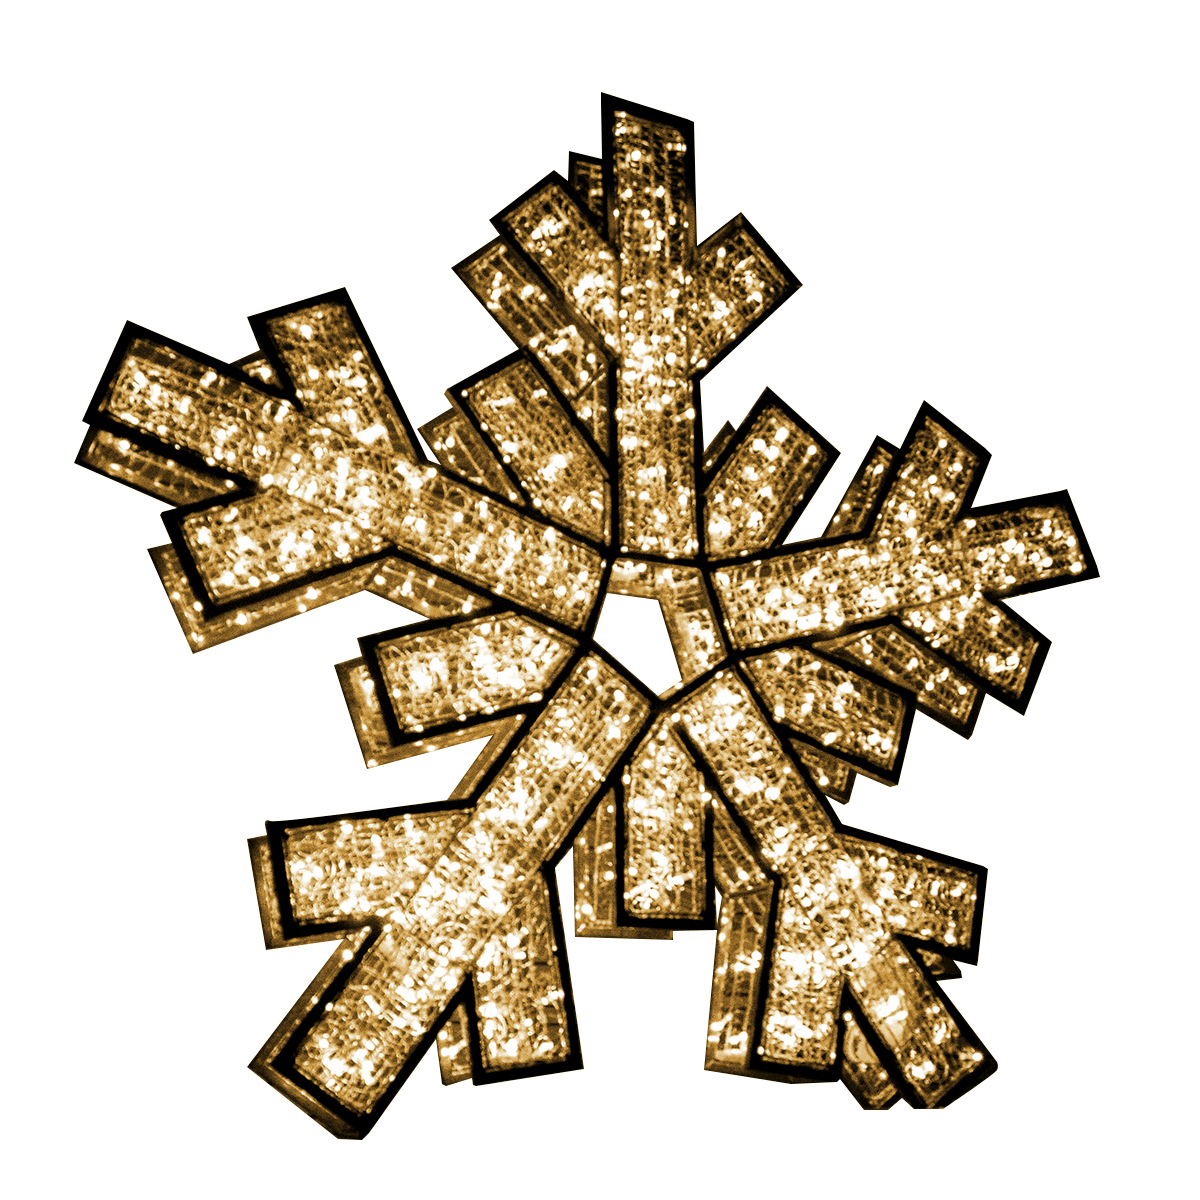 3D Gold 2 Sided Snowflake,, WW LED Lights, Large